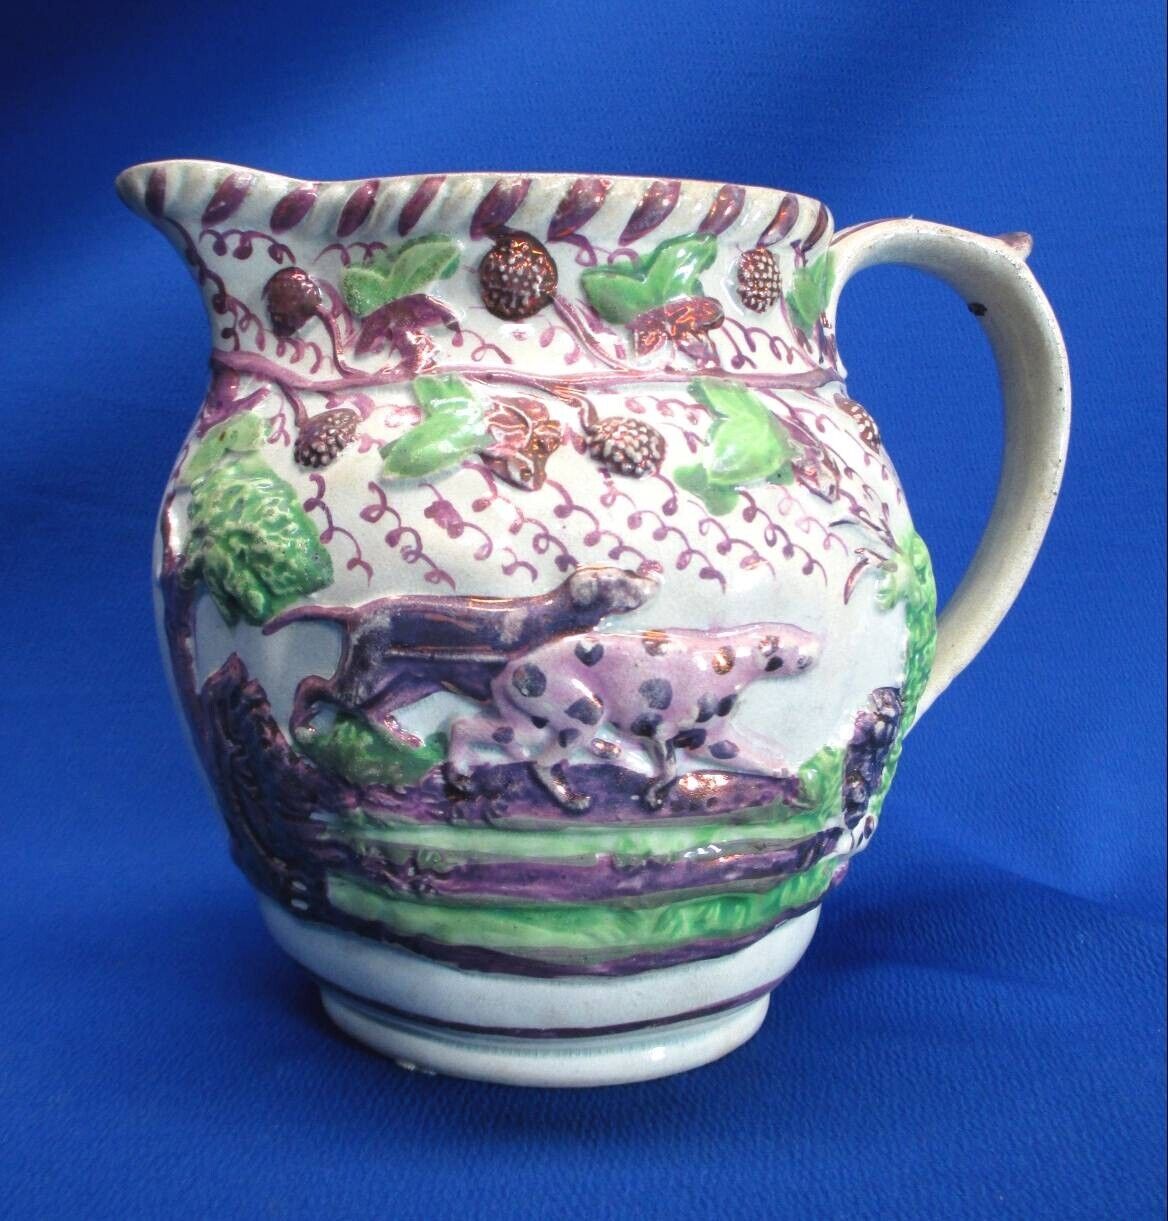 CA 1820 PINK LUSTER RELIEF MOLDED HUNTING DOGS & BERRIES PITCHER 6